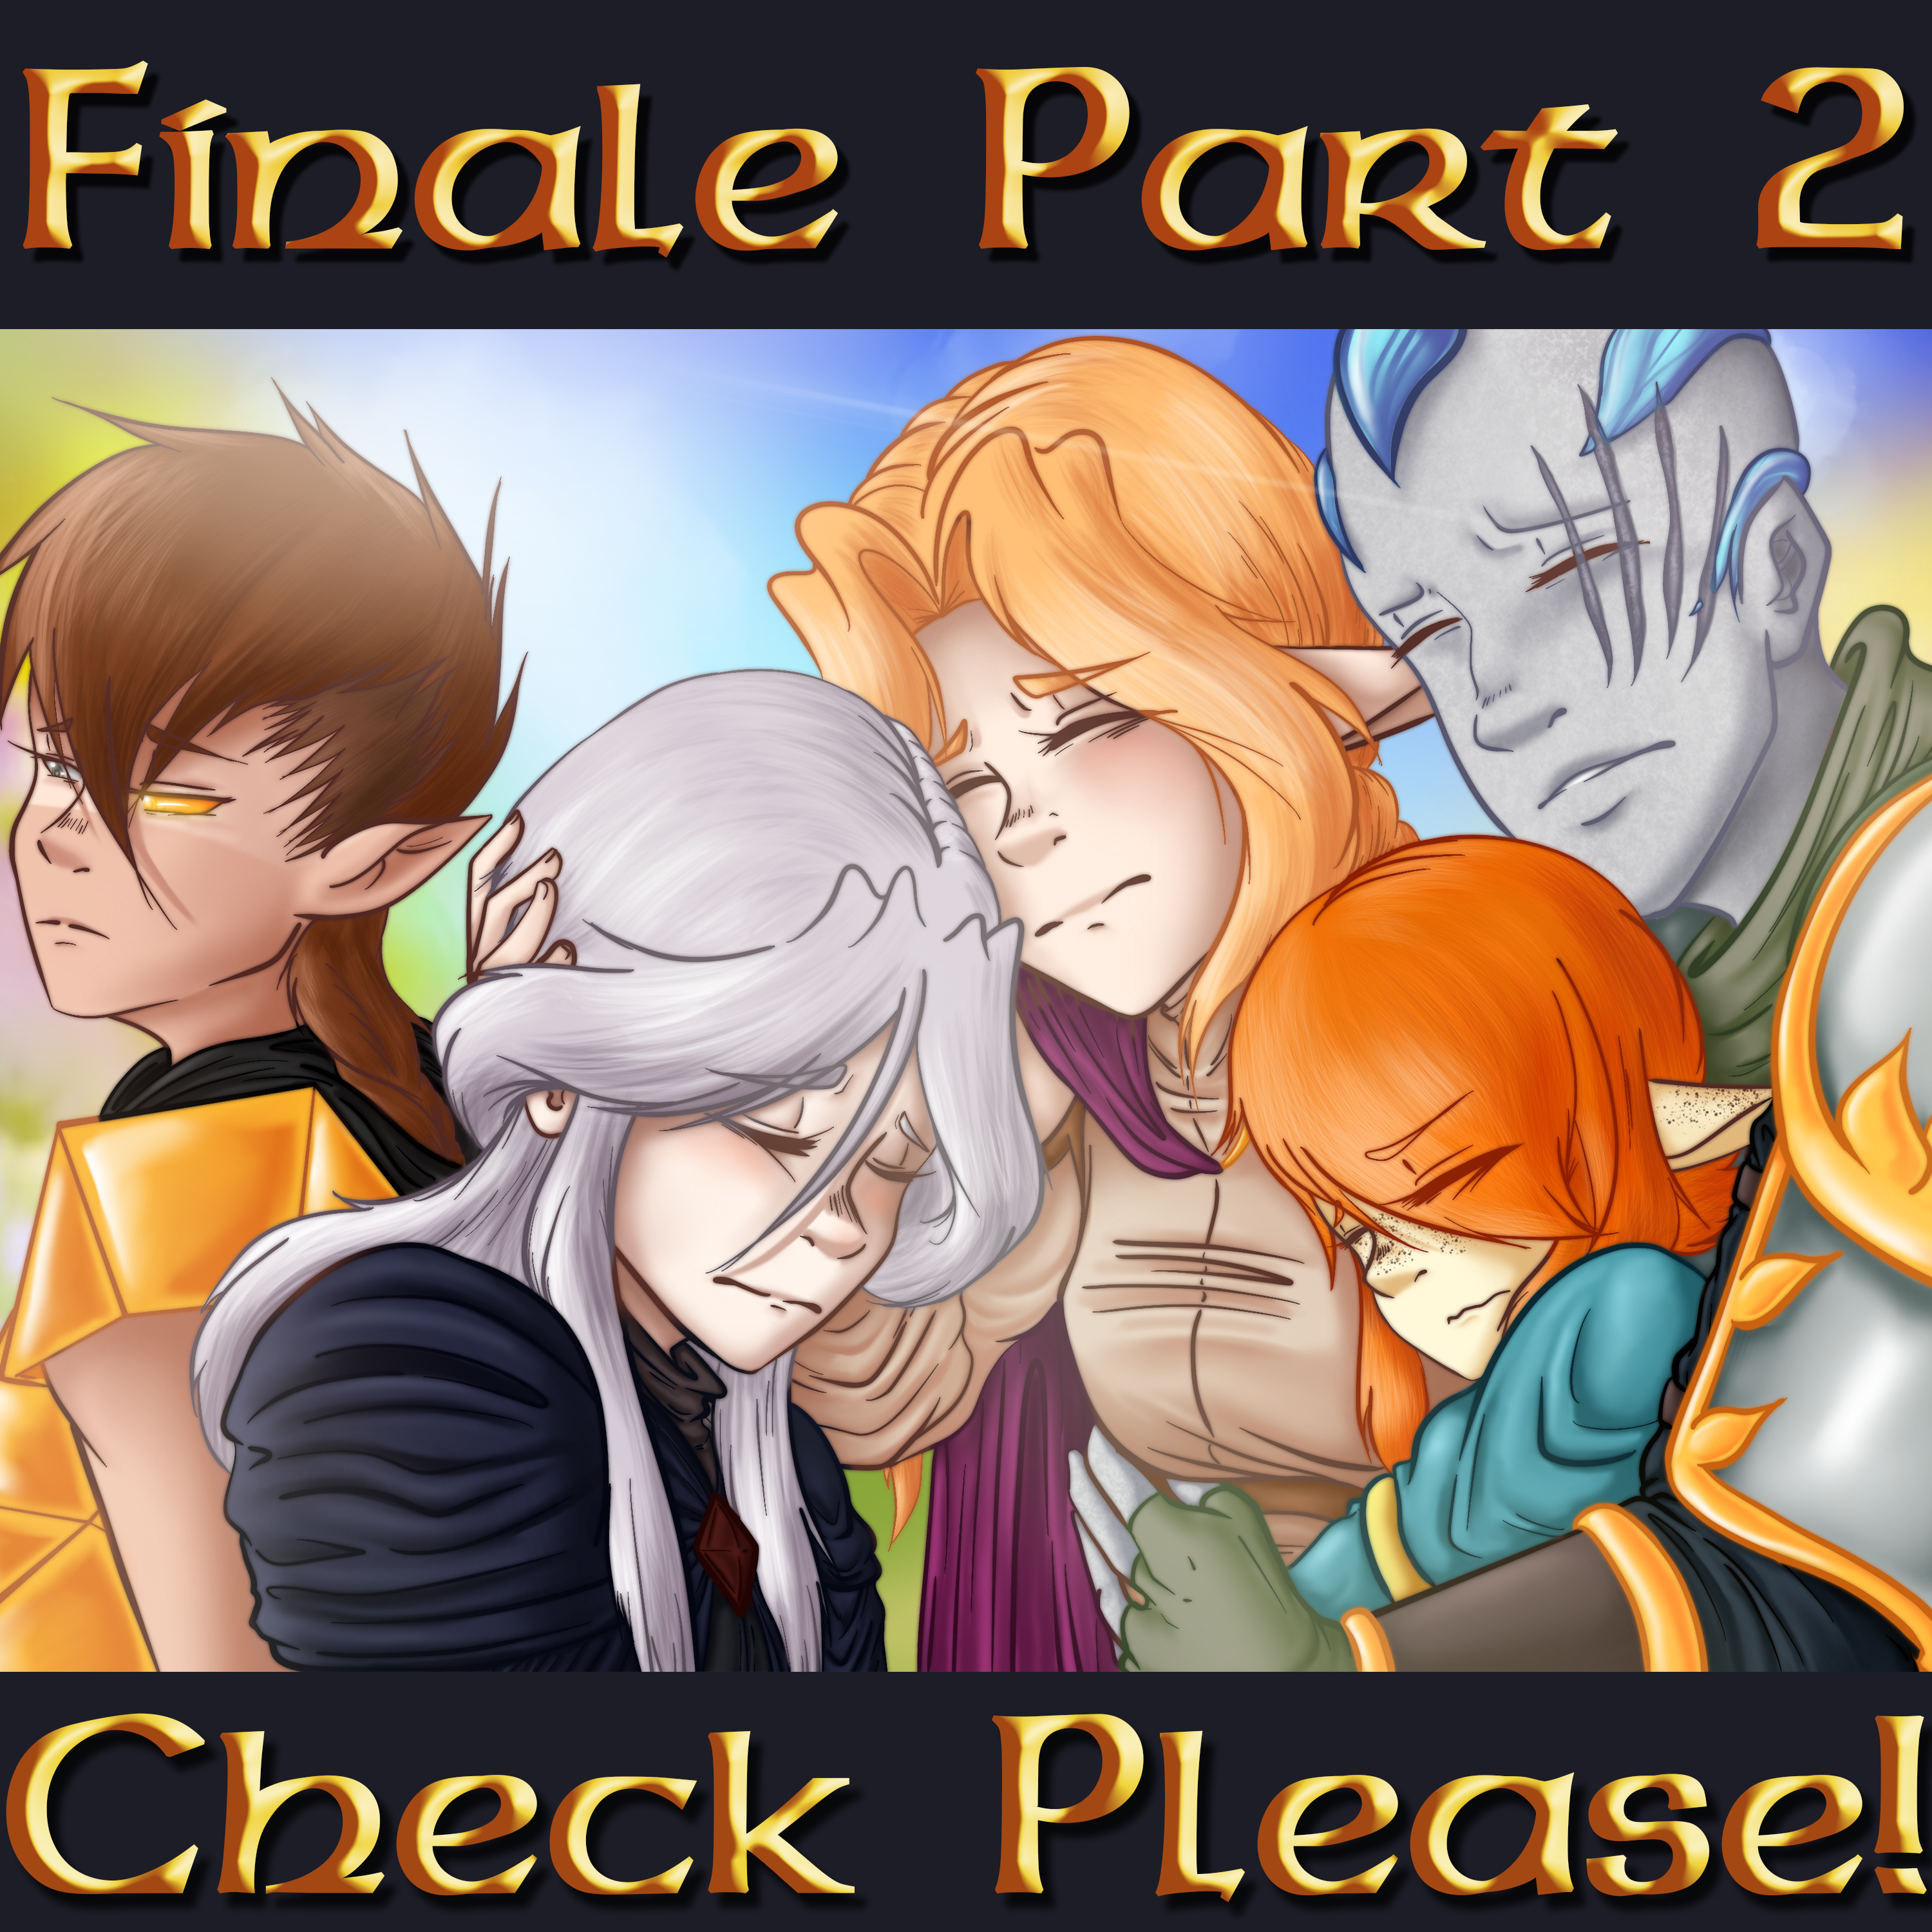 Check Please! S1 Finale part 2: The Last Goodbye